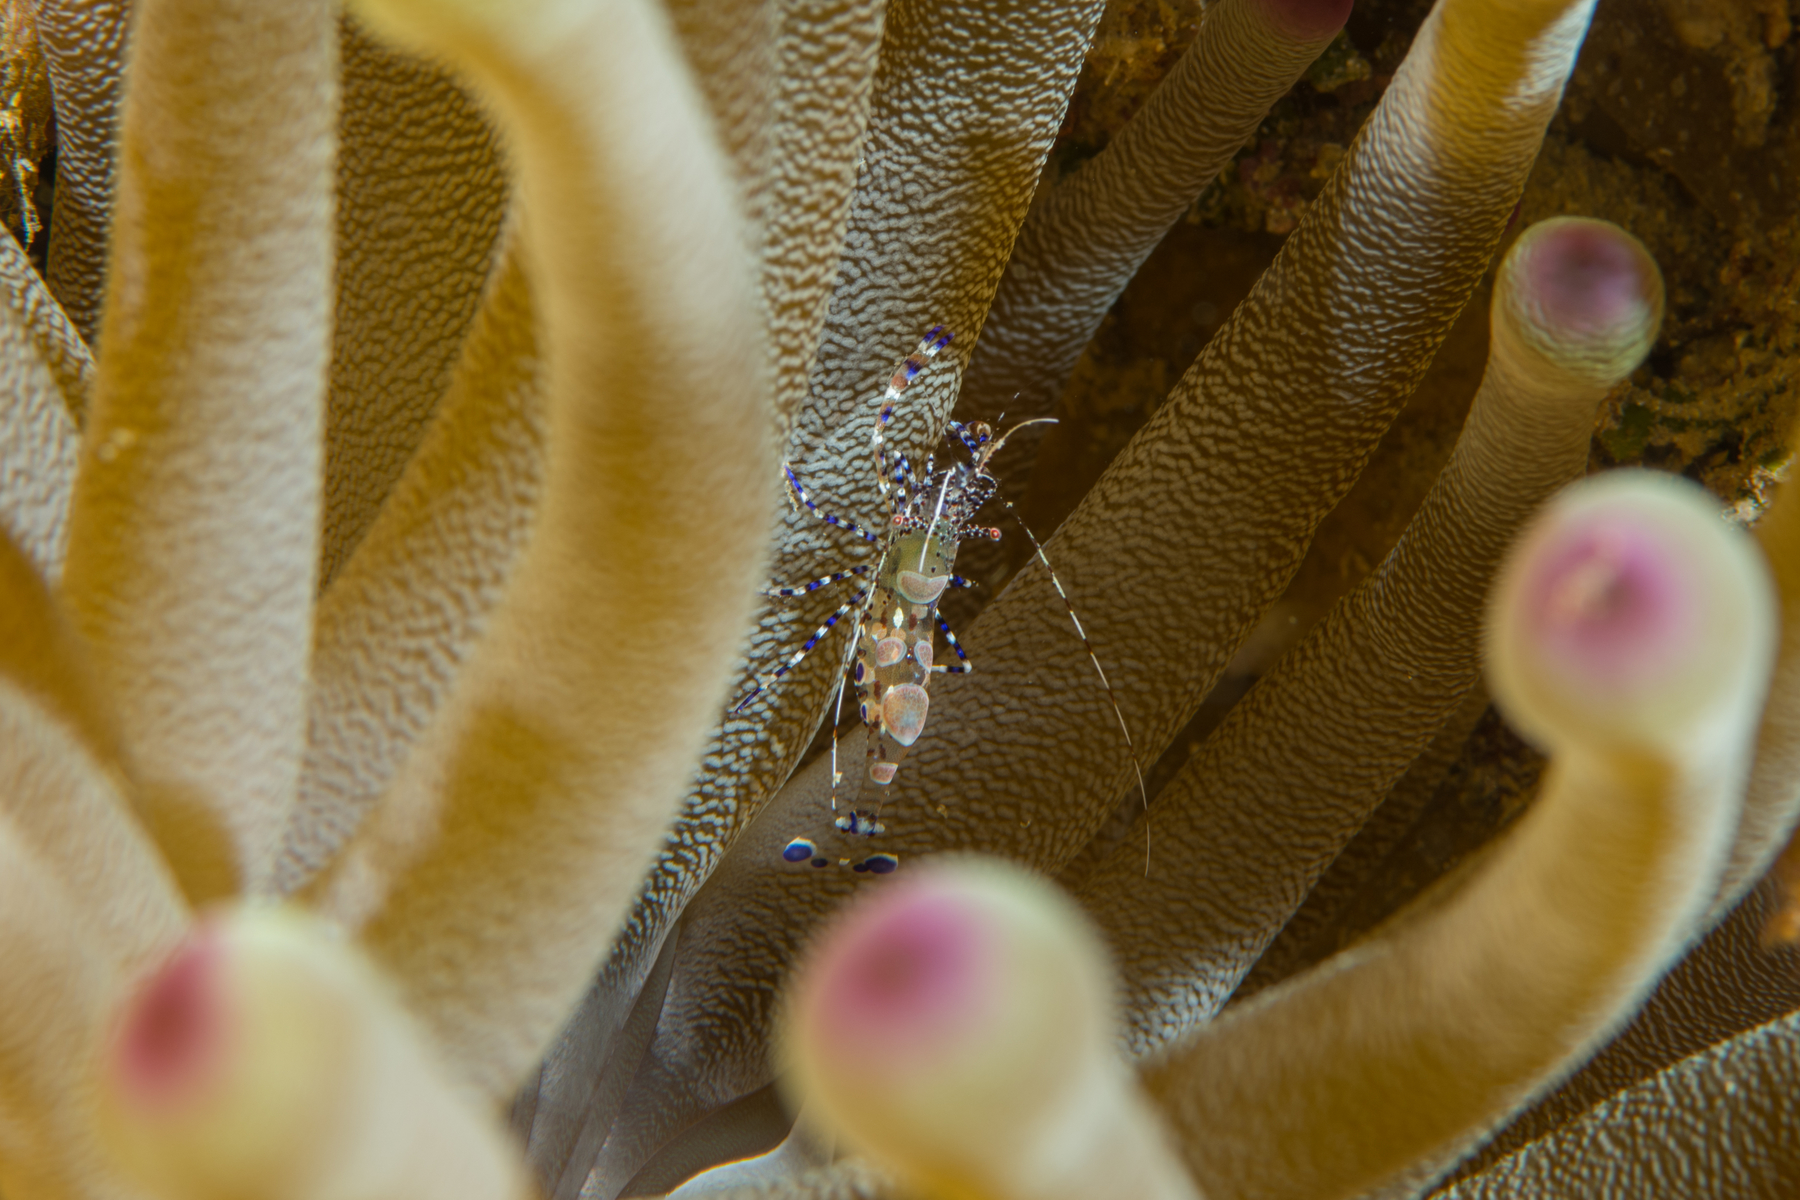 10/3/2021Spotted Cleaner Shrimp in Anemone.  It is very common to see small shrimp and crabs living in and under anemones.